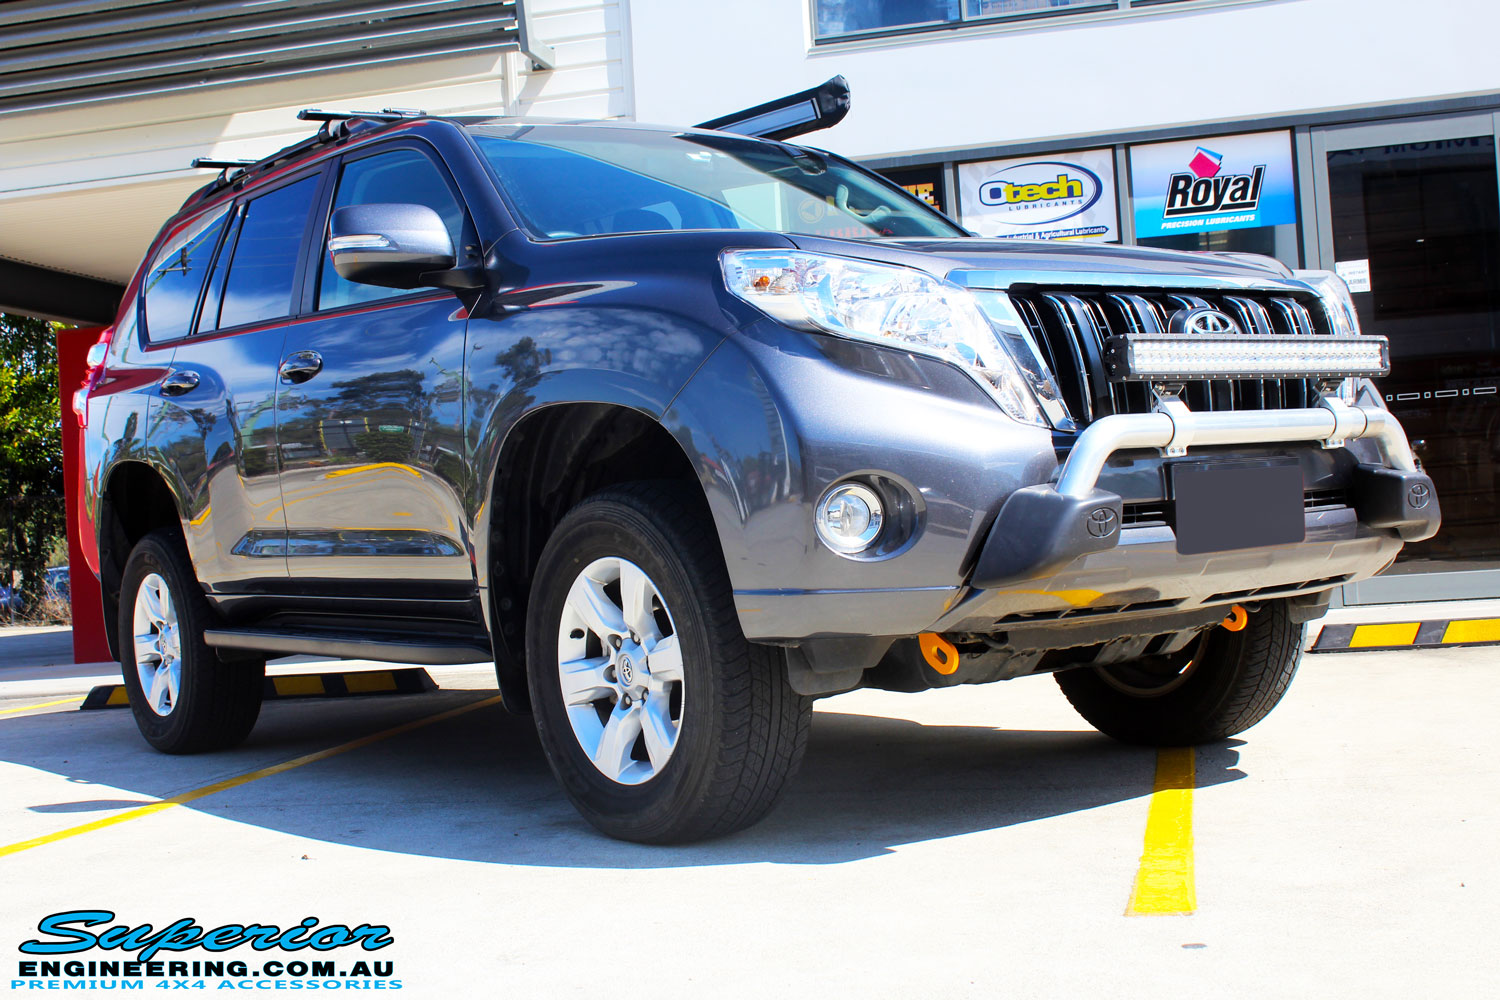 Right front side view of a Grey Toyota 150 Landcruiser Prado Wagon after fitment of a Superior Remote Reservoir 2" Inch Lift Kit, Airbag Man Coil Air Kit & King Springs